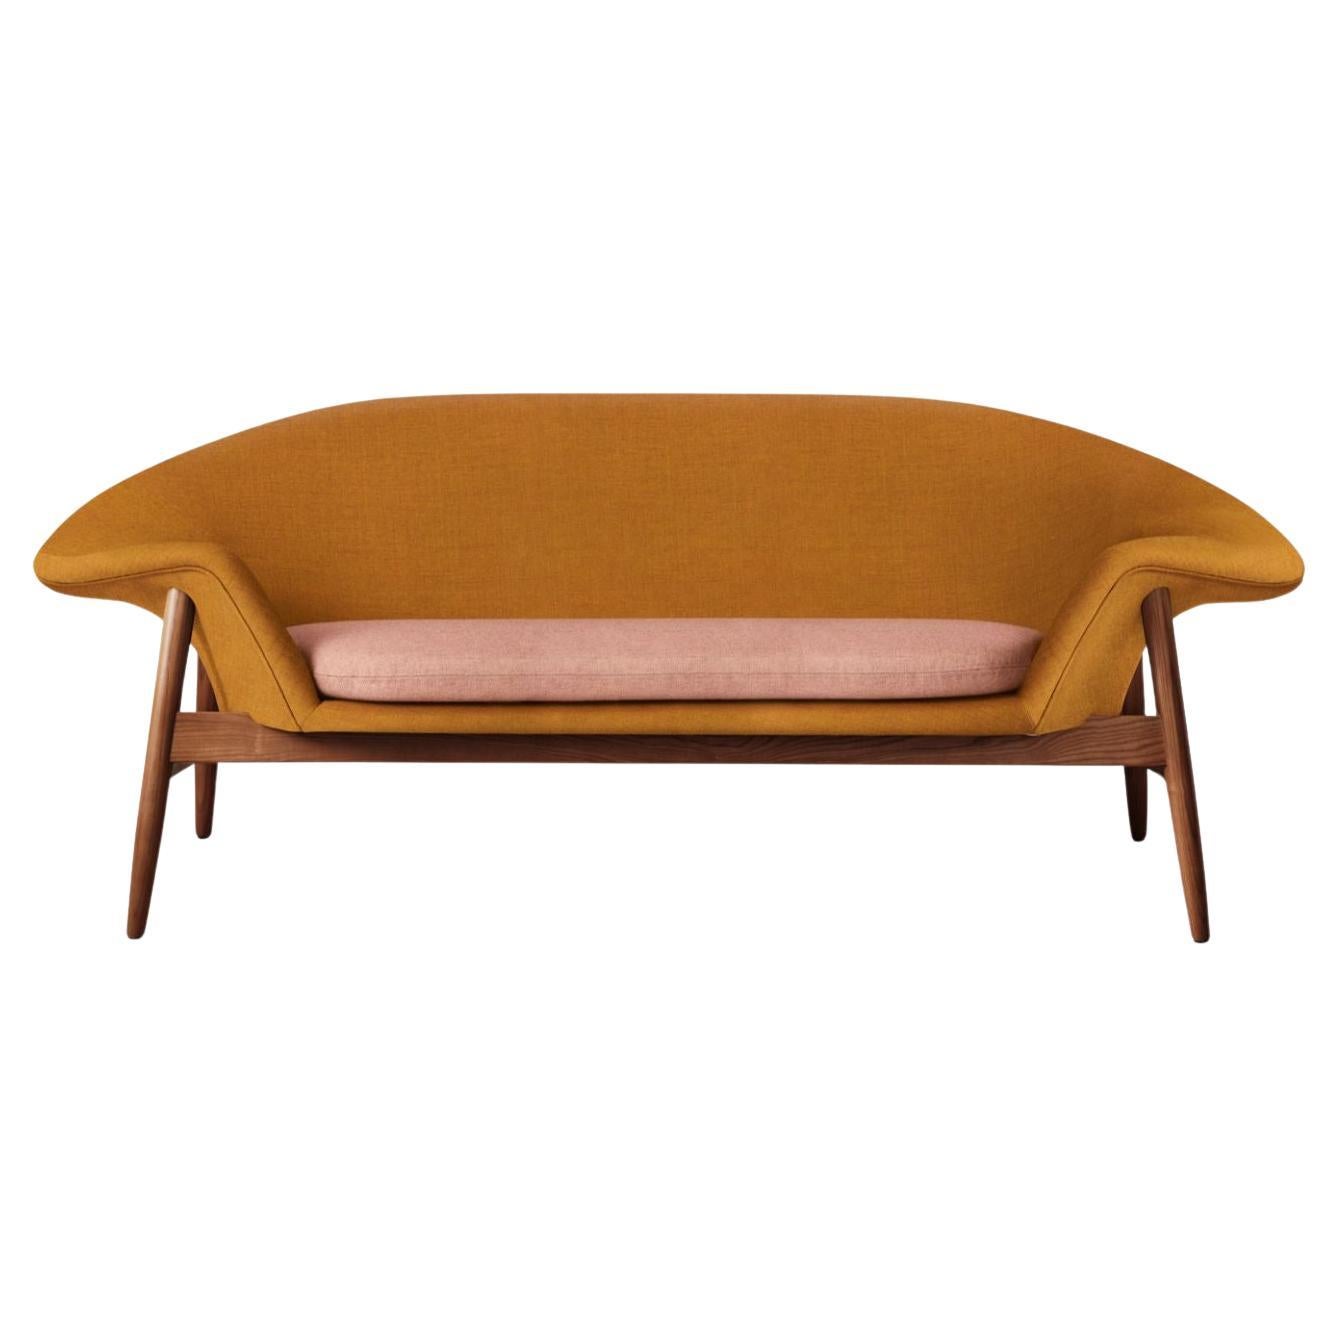 Fried Egg Sofa Dark Ochre, Pale Rose by Warm Nordic For Sale